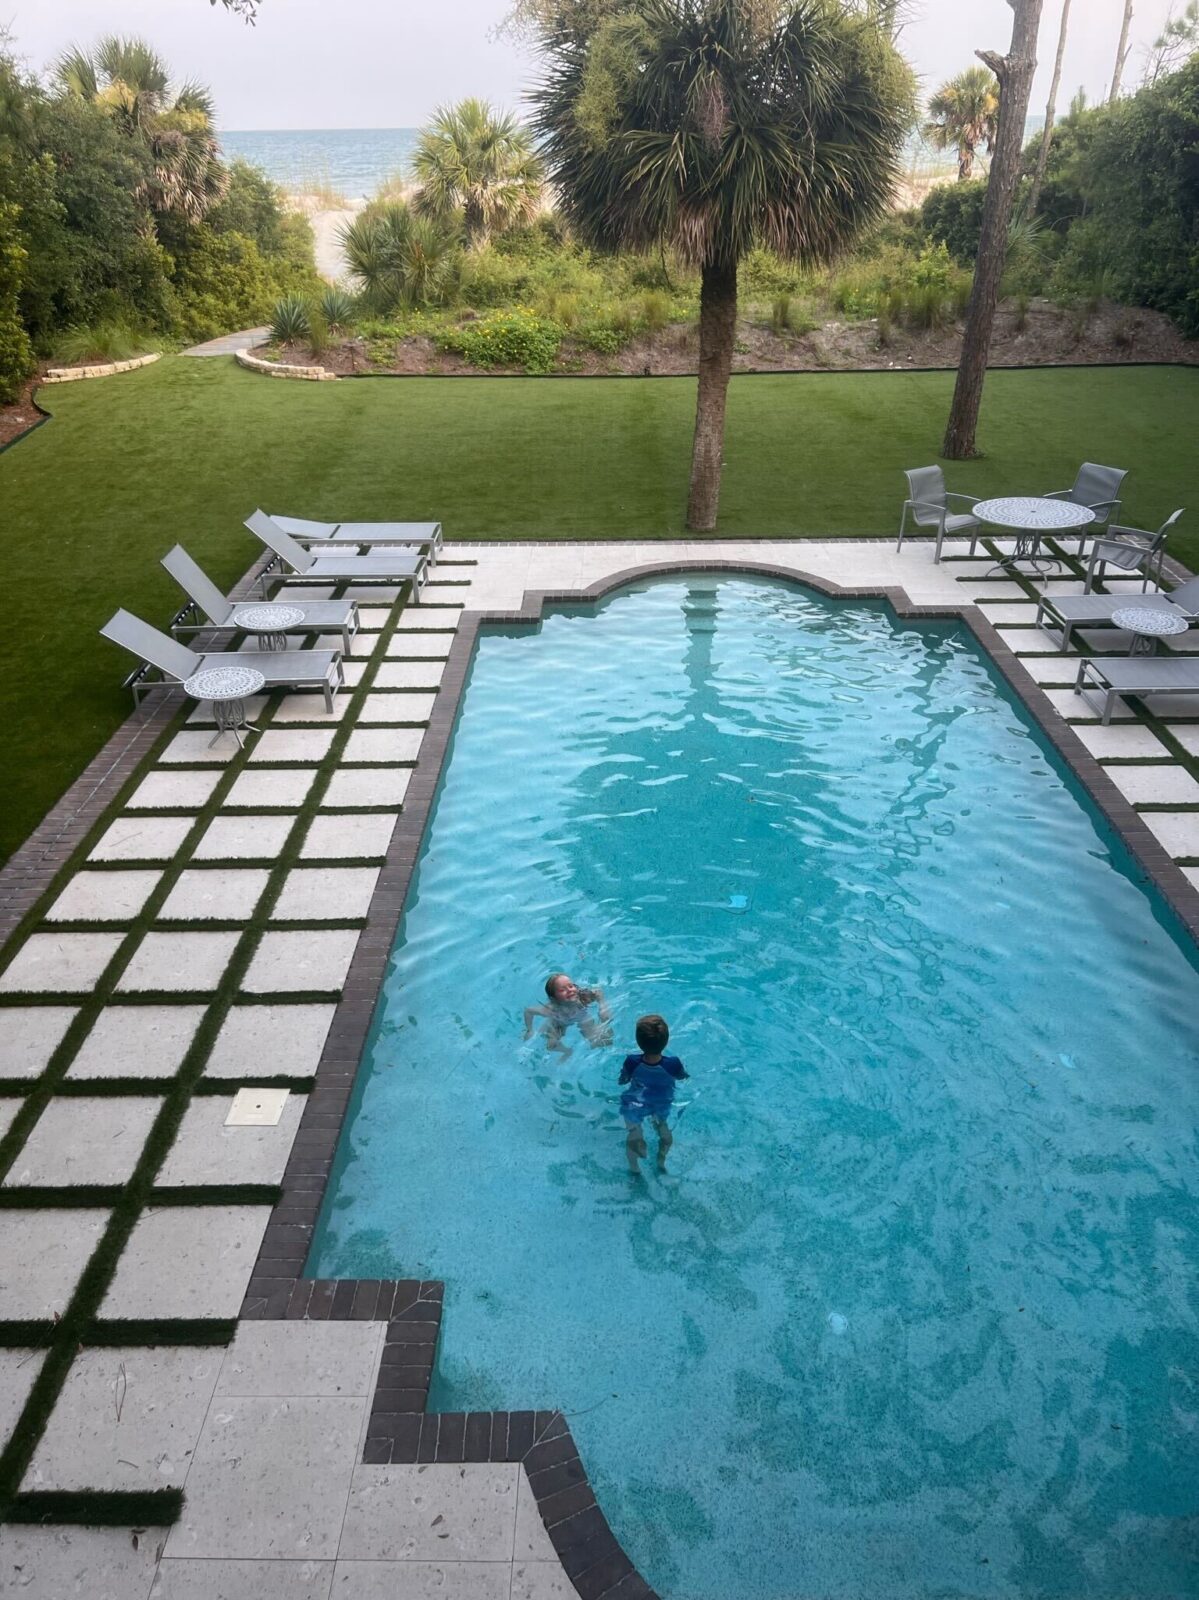 Swimming in a backyard pool in Hilton Head with a path to the ocean shown in the background